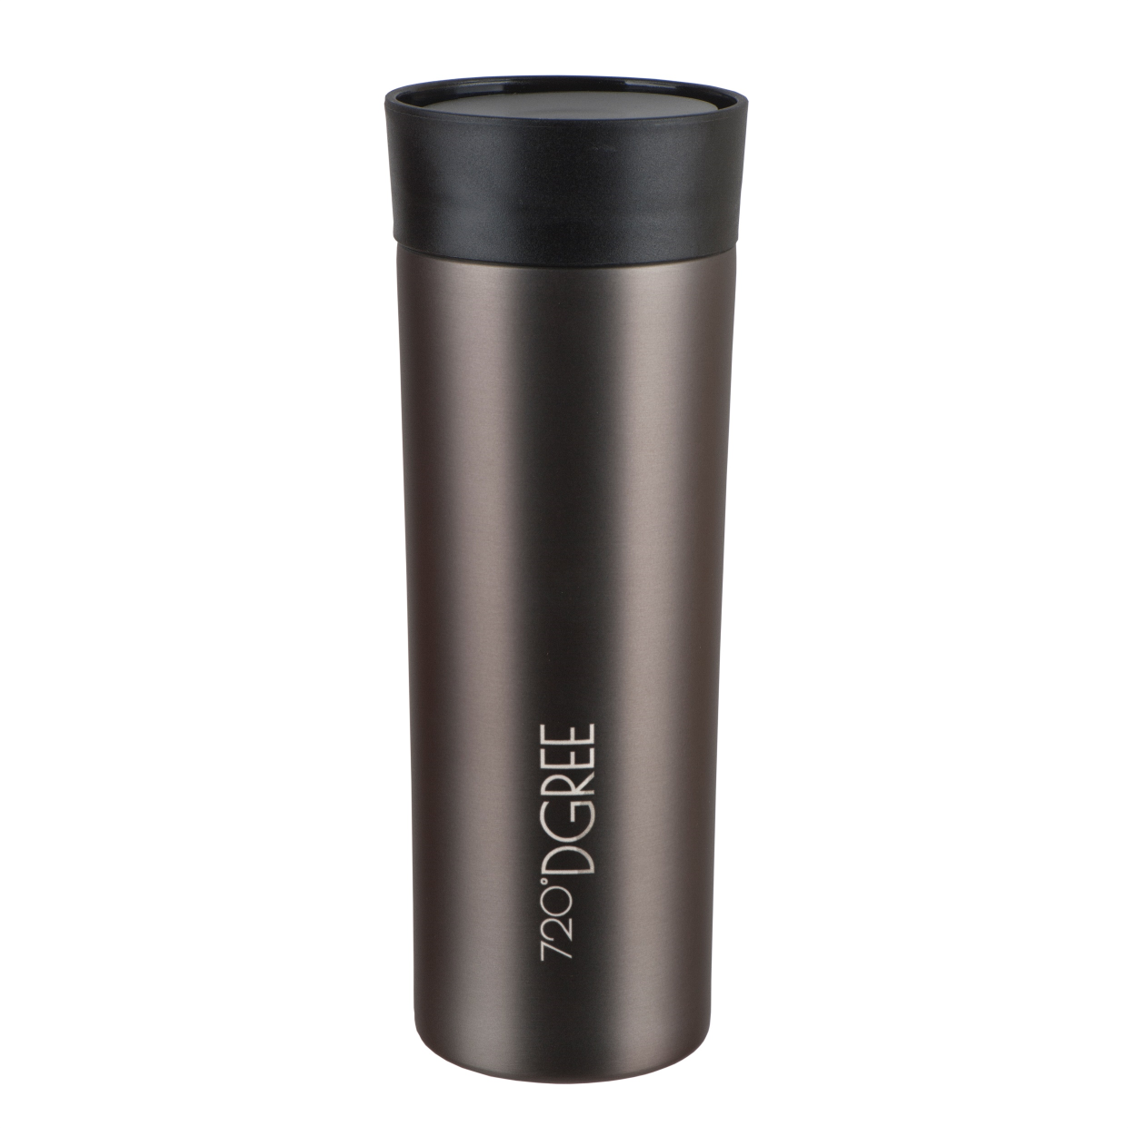 School break & lessons with your new water bottle – 720°DGREE